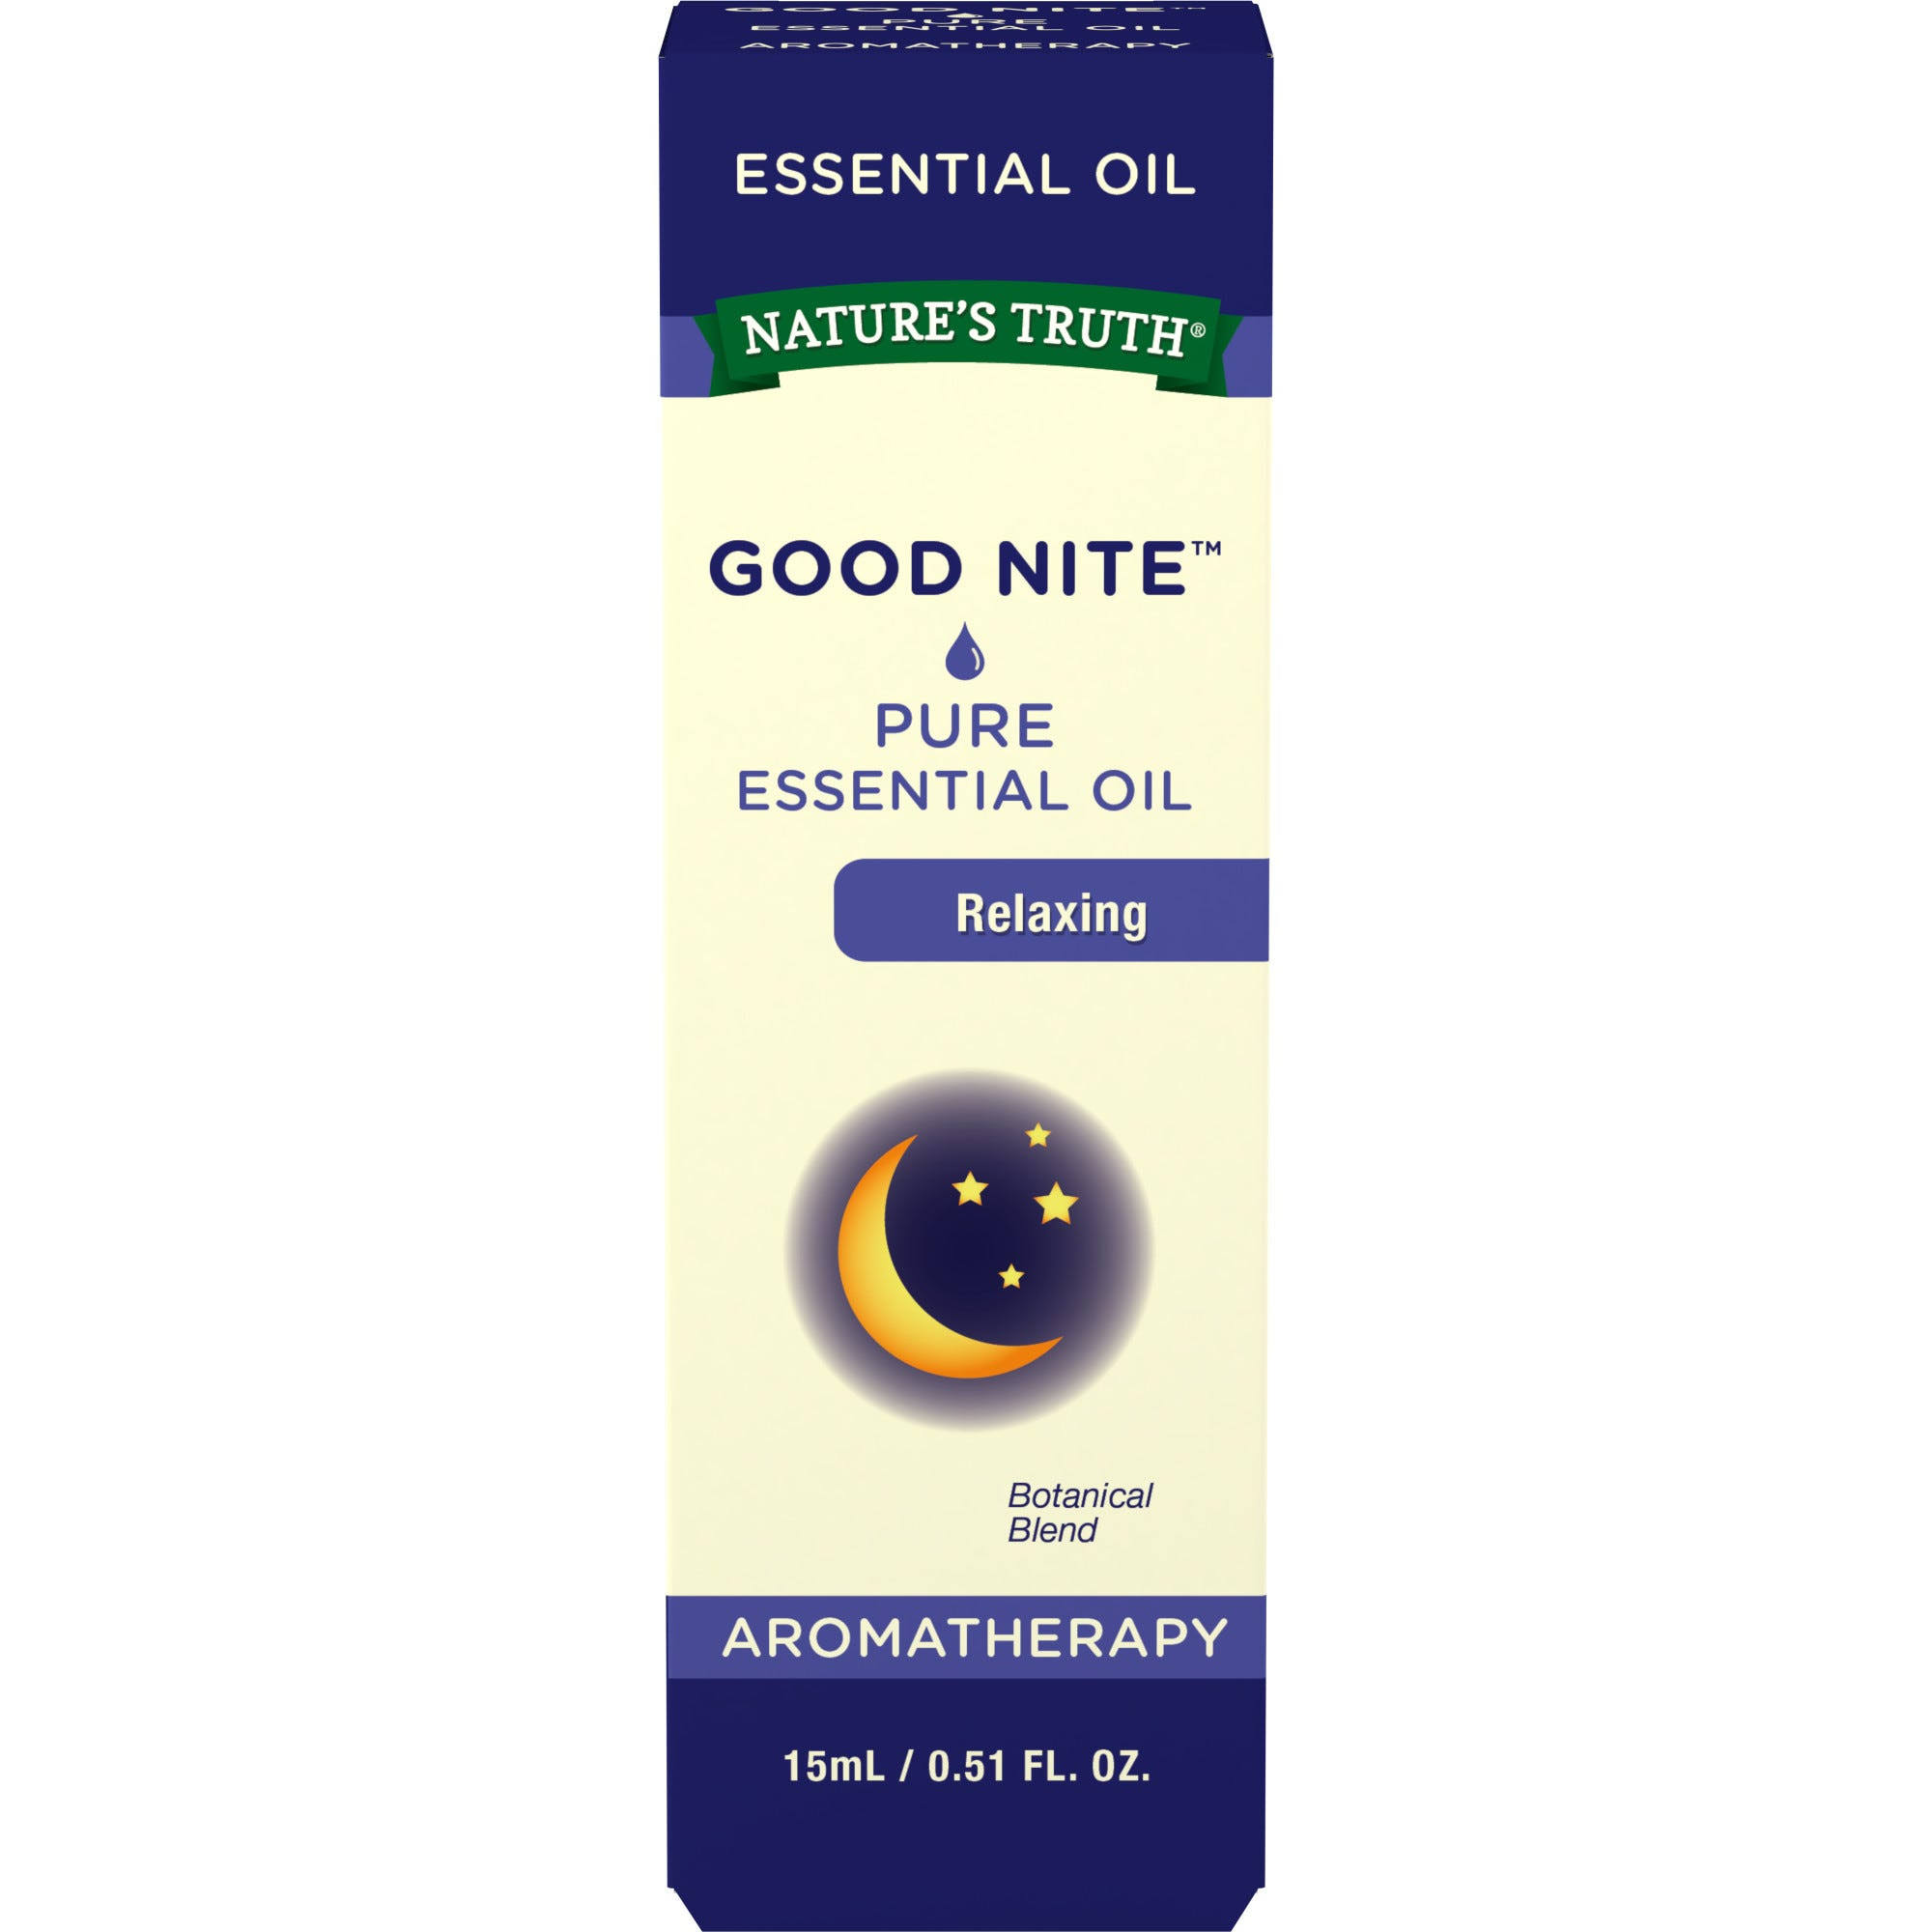 Nature's Truth Good Nite Aromatherapy Essential Oil - Calming, 0.51oz